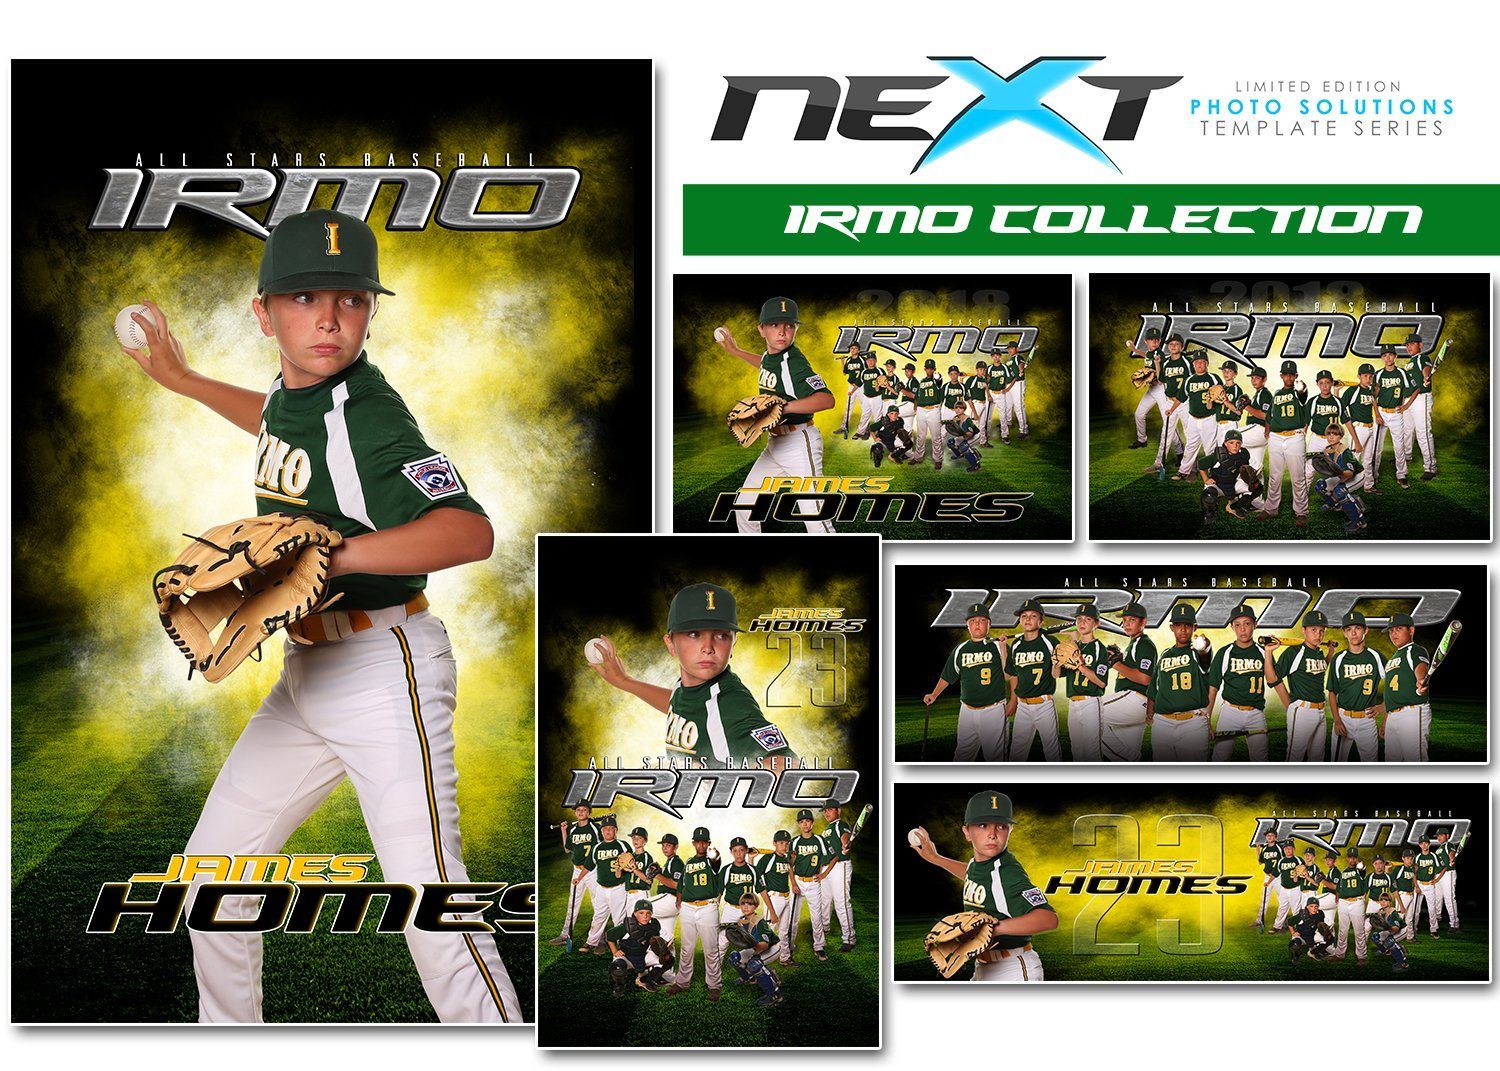 01 Full Set - IRMO Collection-Photoshop Template - Photo Solutions